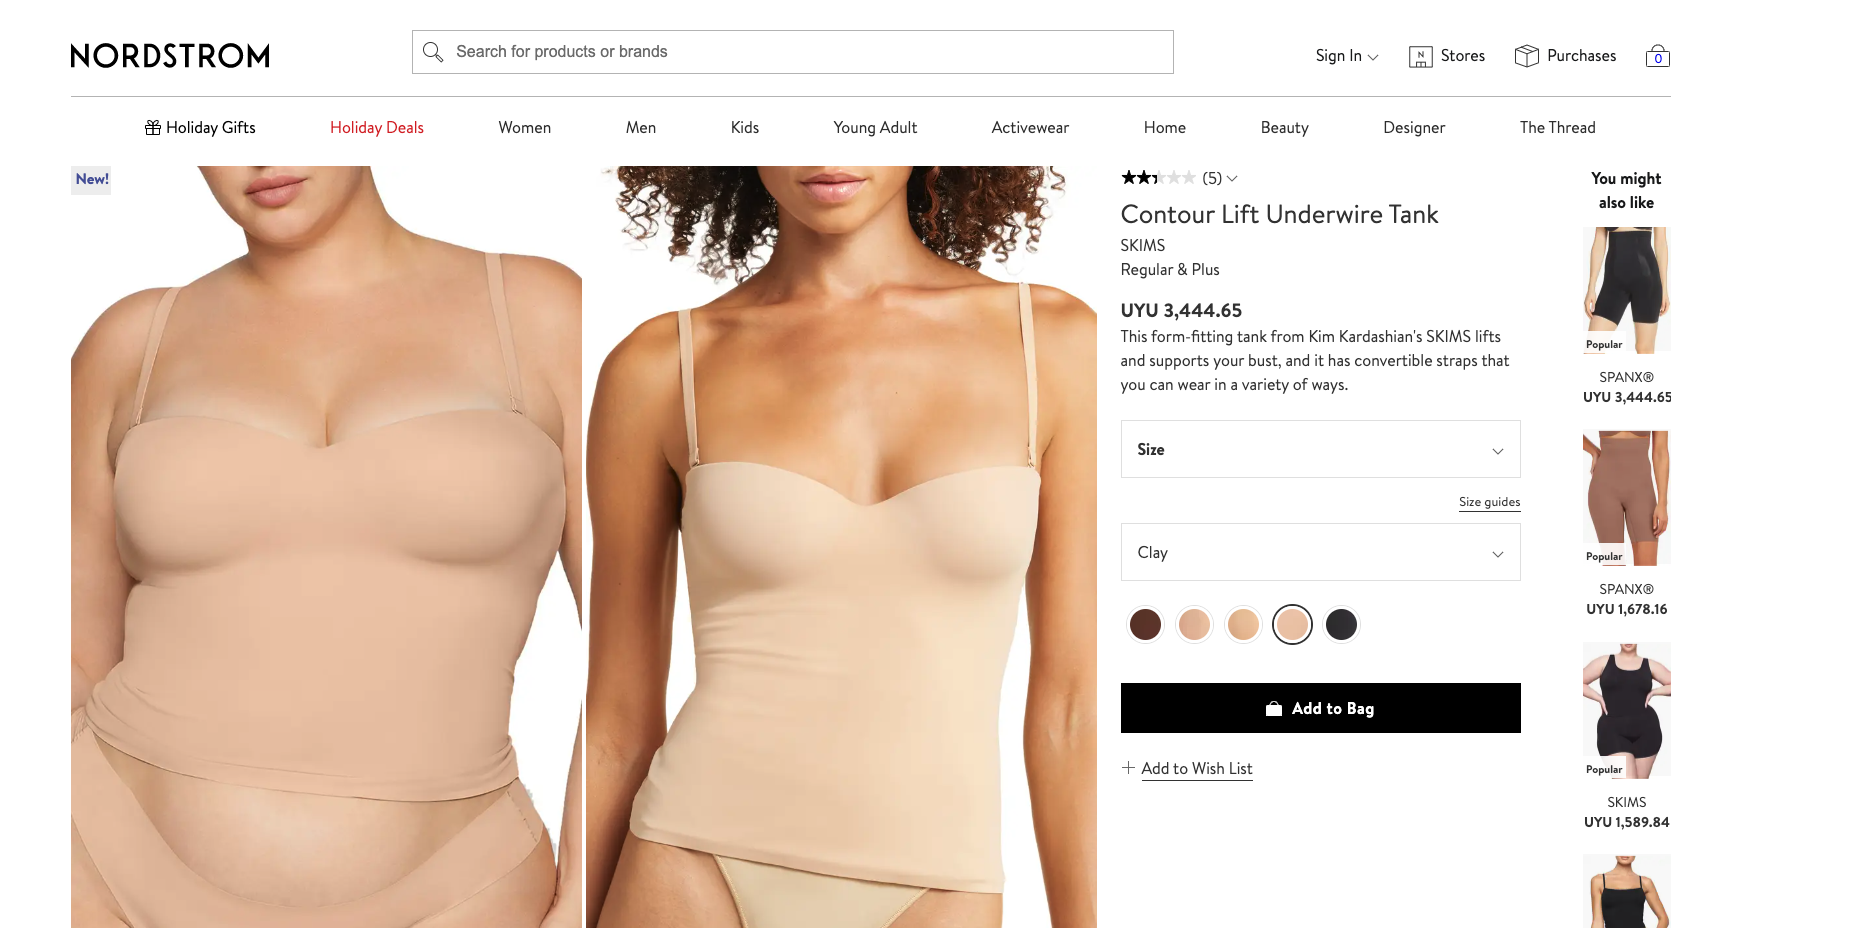 Nordstrom Product Page Example